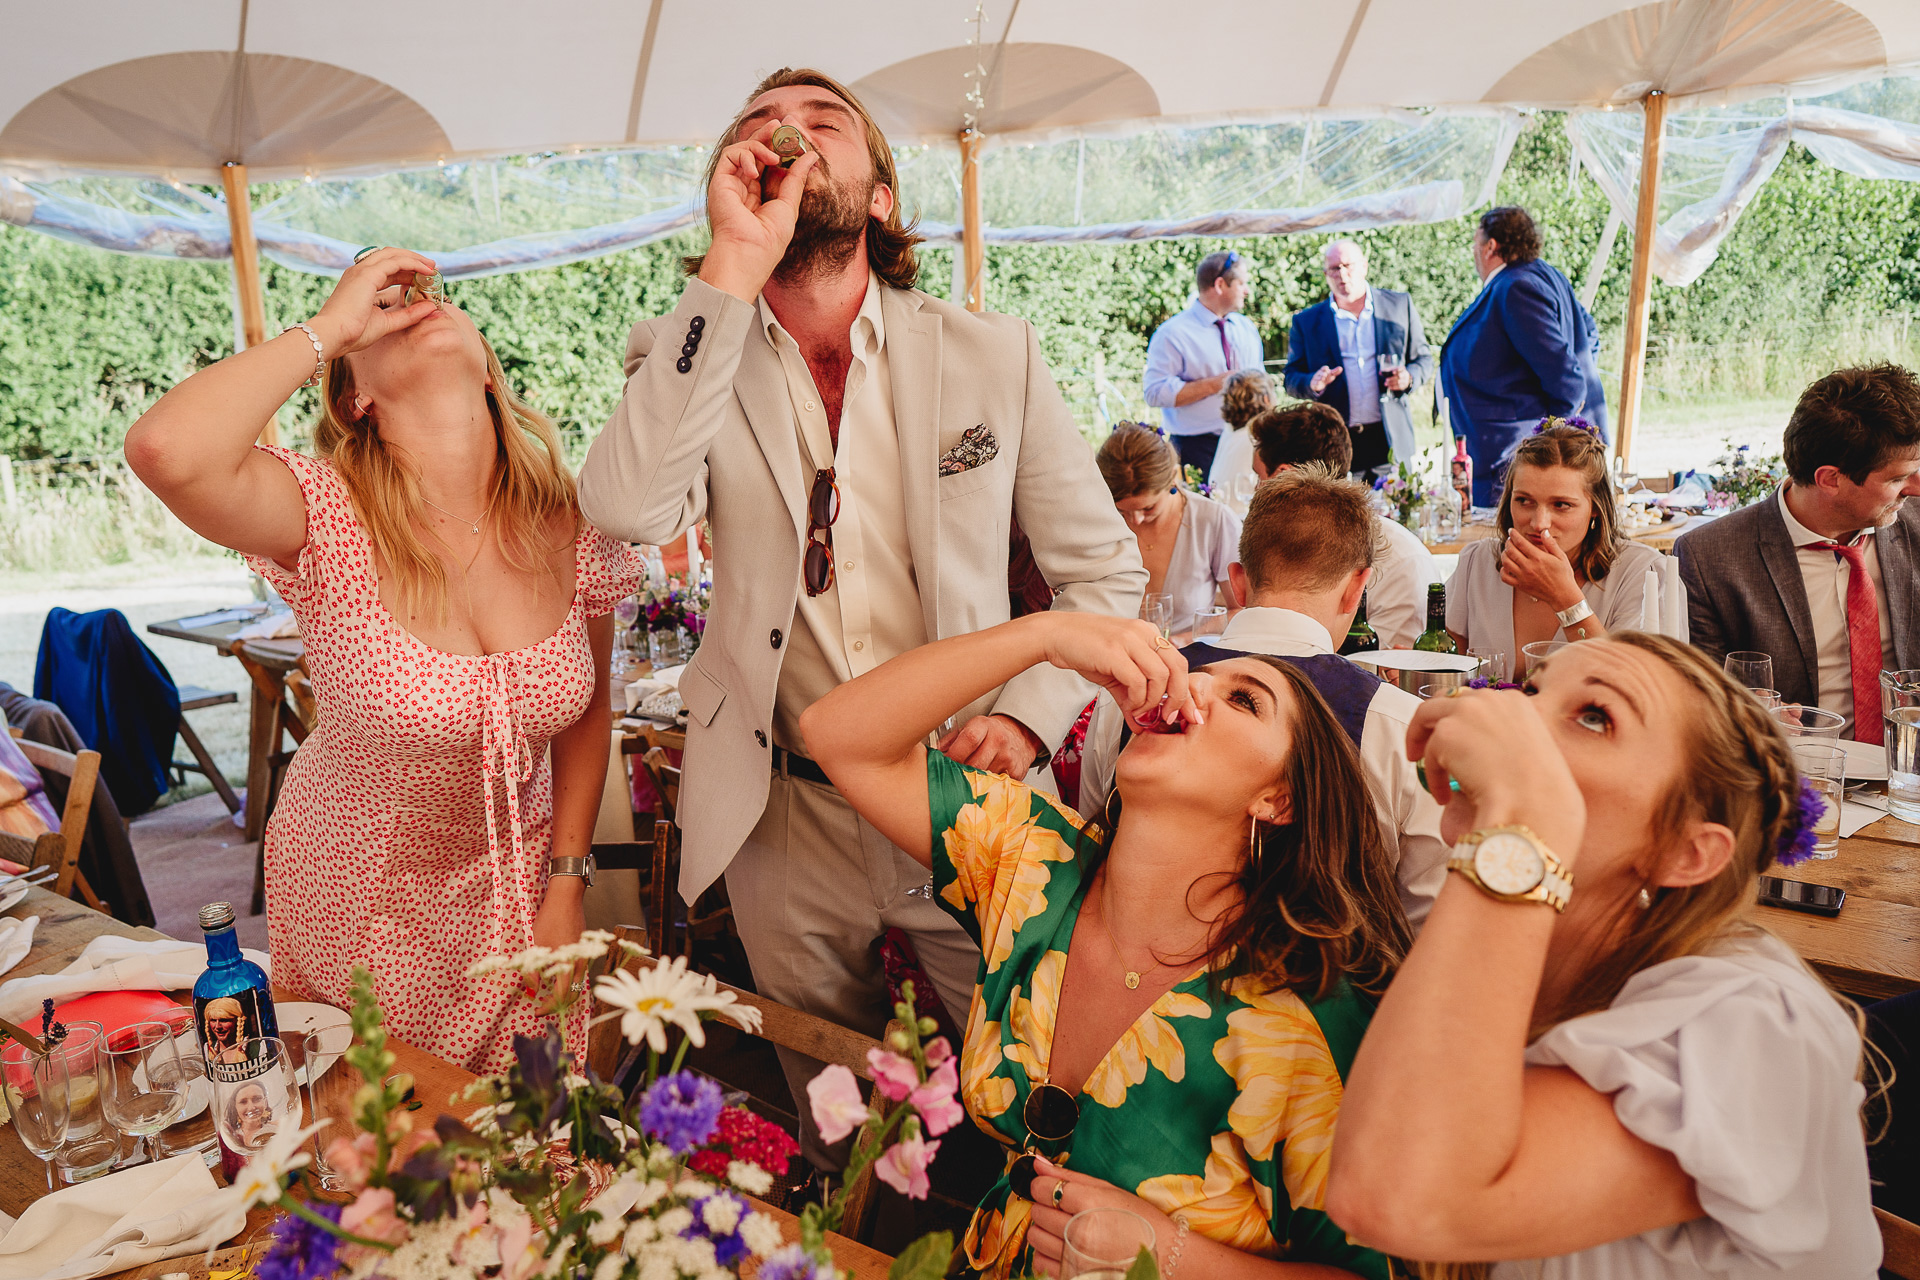 Group of wedding guests downing shots